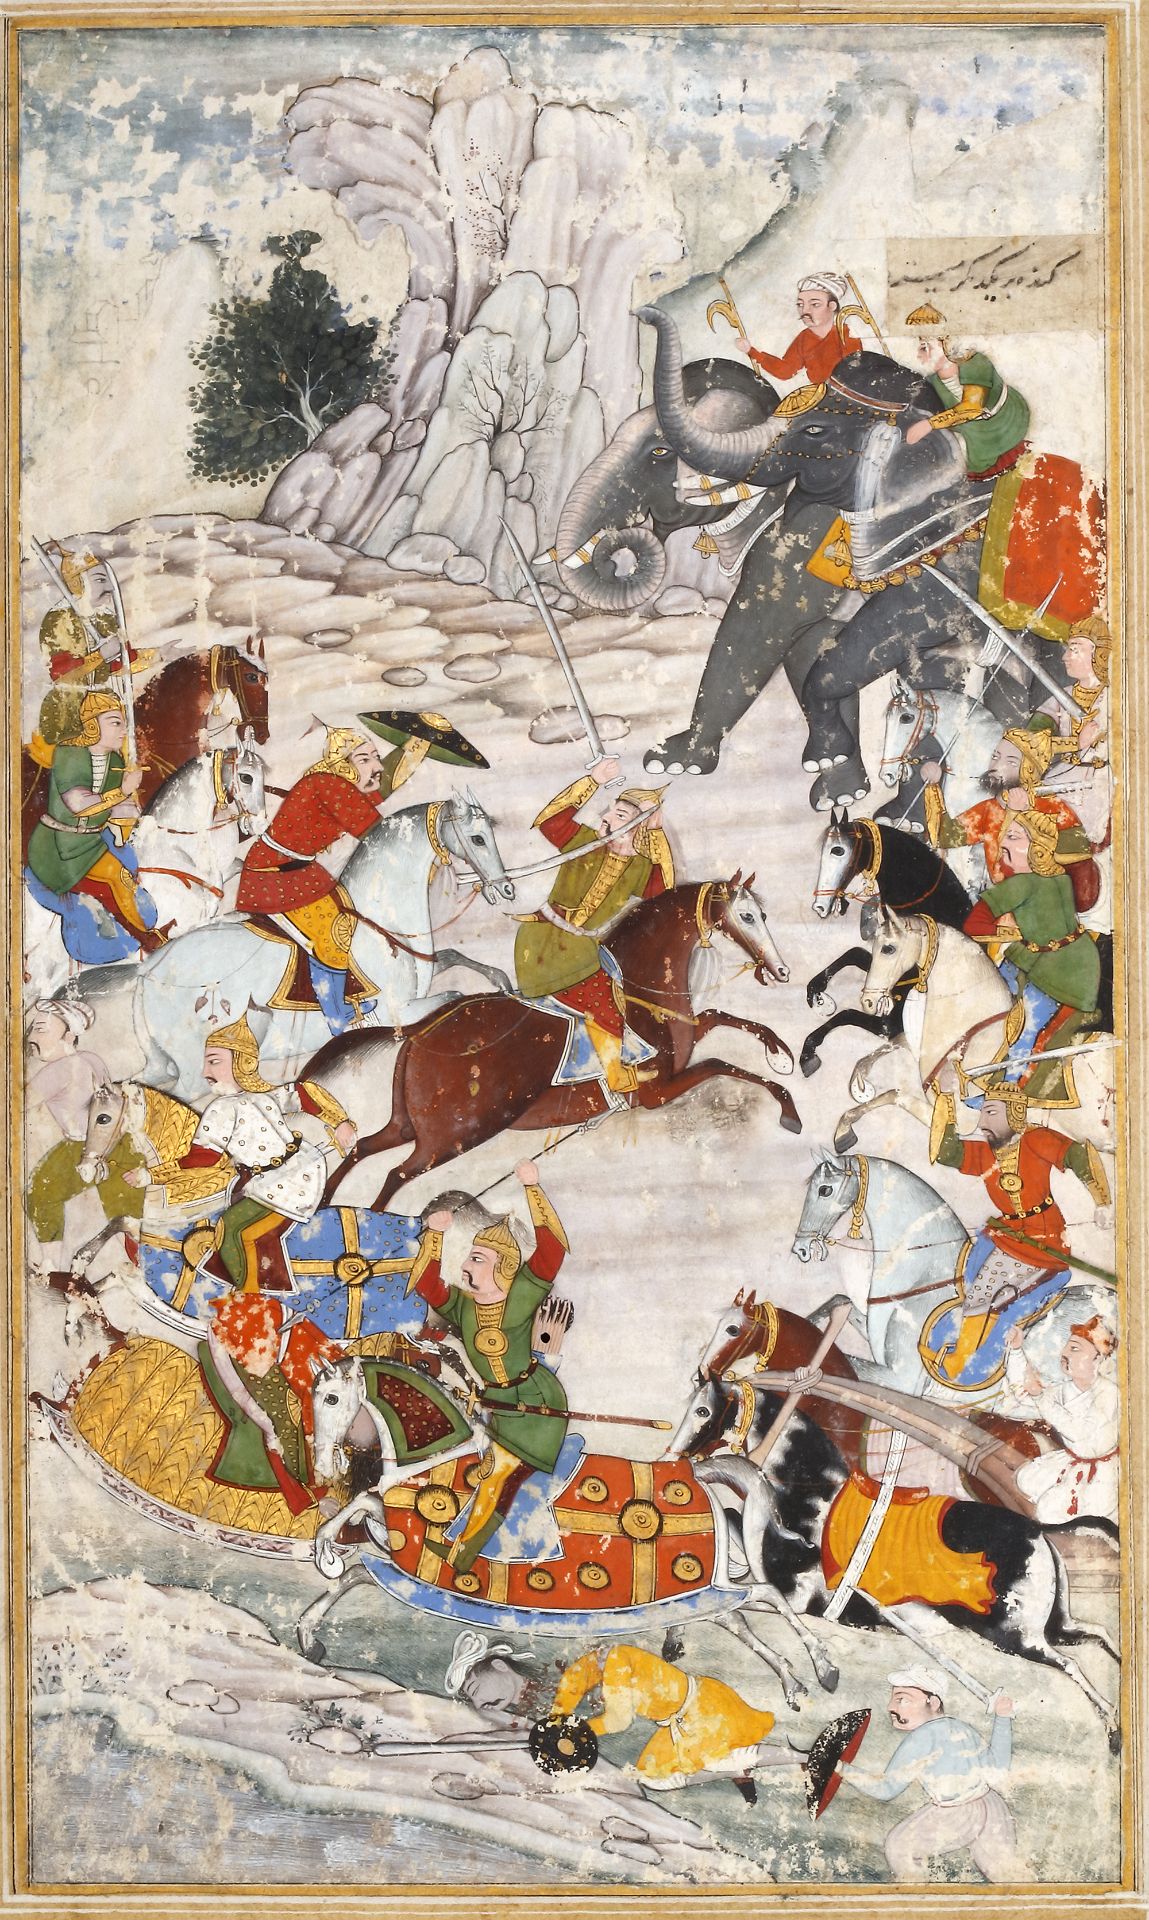 A MINIATURE OF A BATTLE SCENE, MUGHAL INDIA, AKBAR WORKSHOPS, EARLY 17TH CENTURY - Image 2 of 4